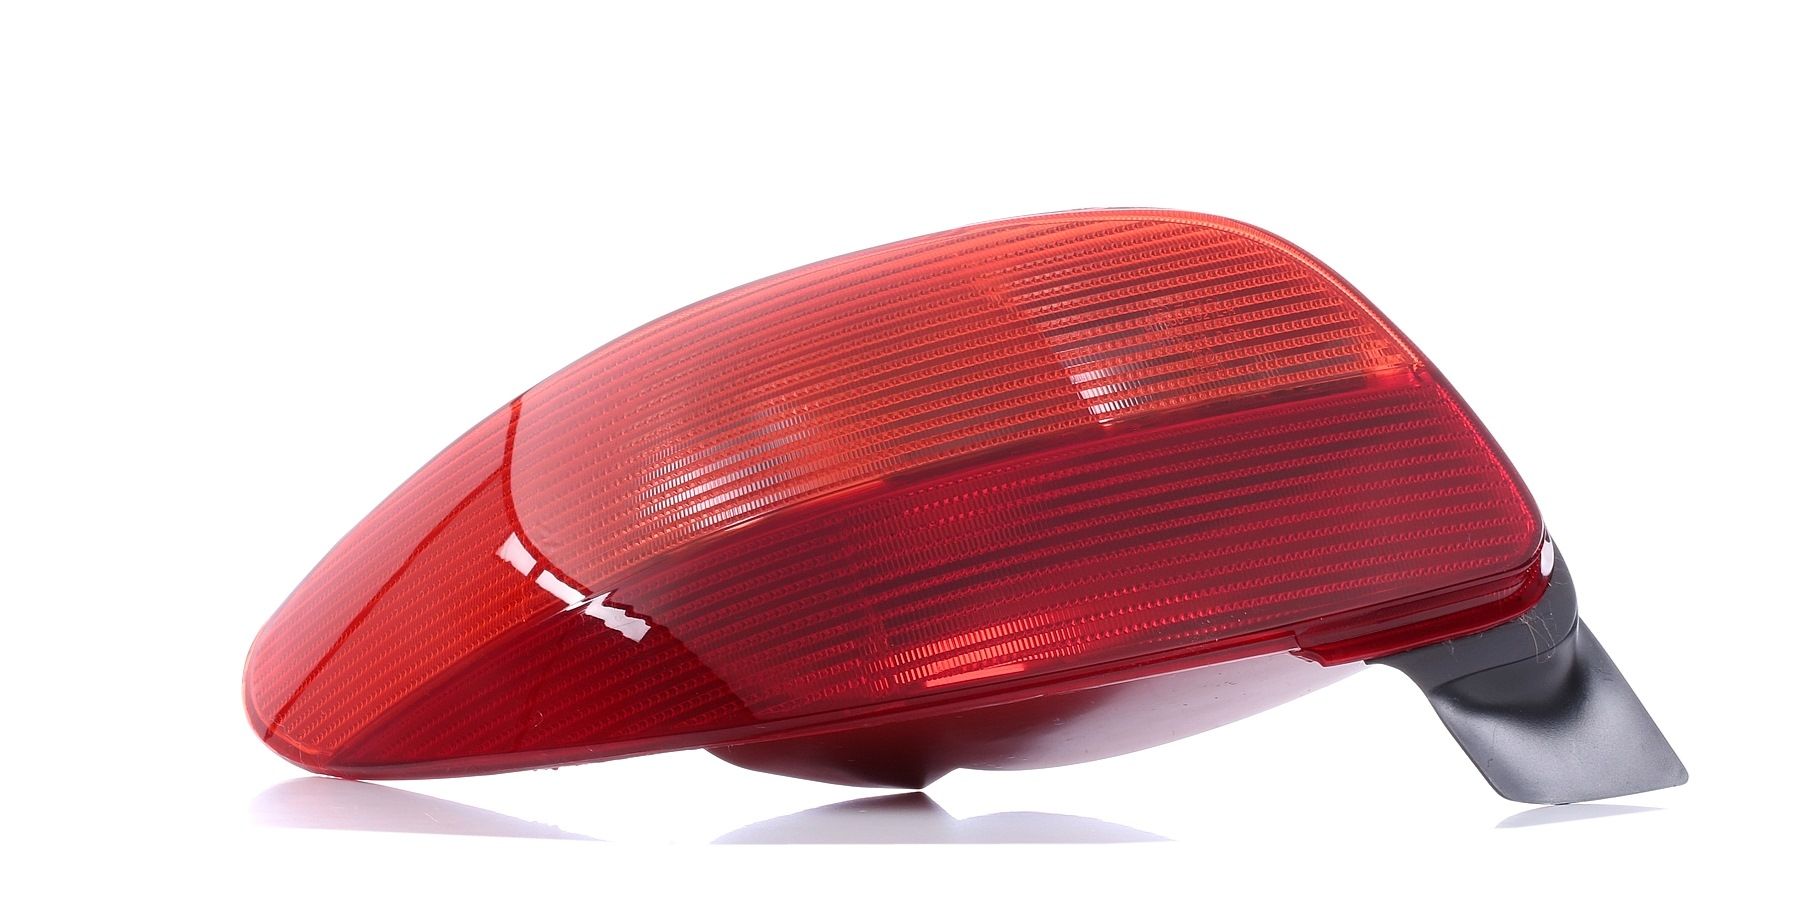 550-1921L-UE ABAKUS Tail lights PEUGEOT Left, PY21W, P21W, P21/5W, red, without bulb holder, without bulb